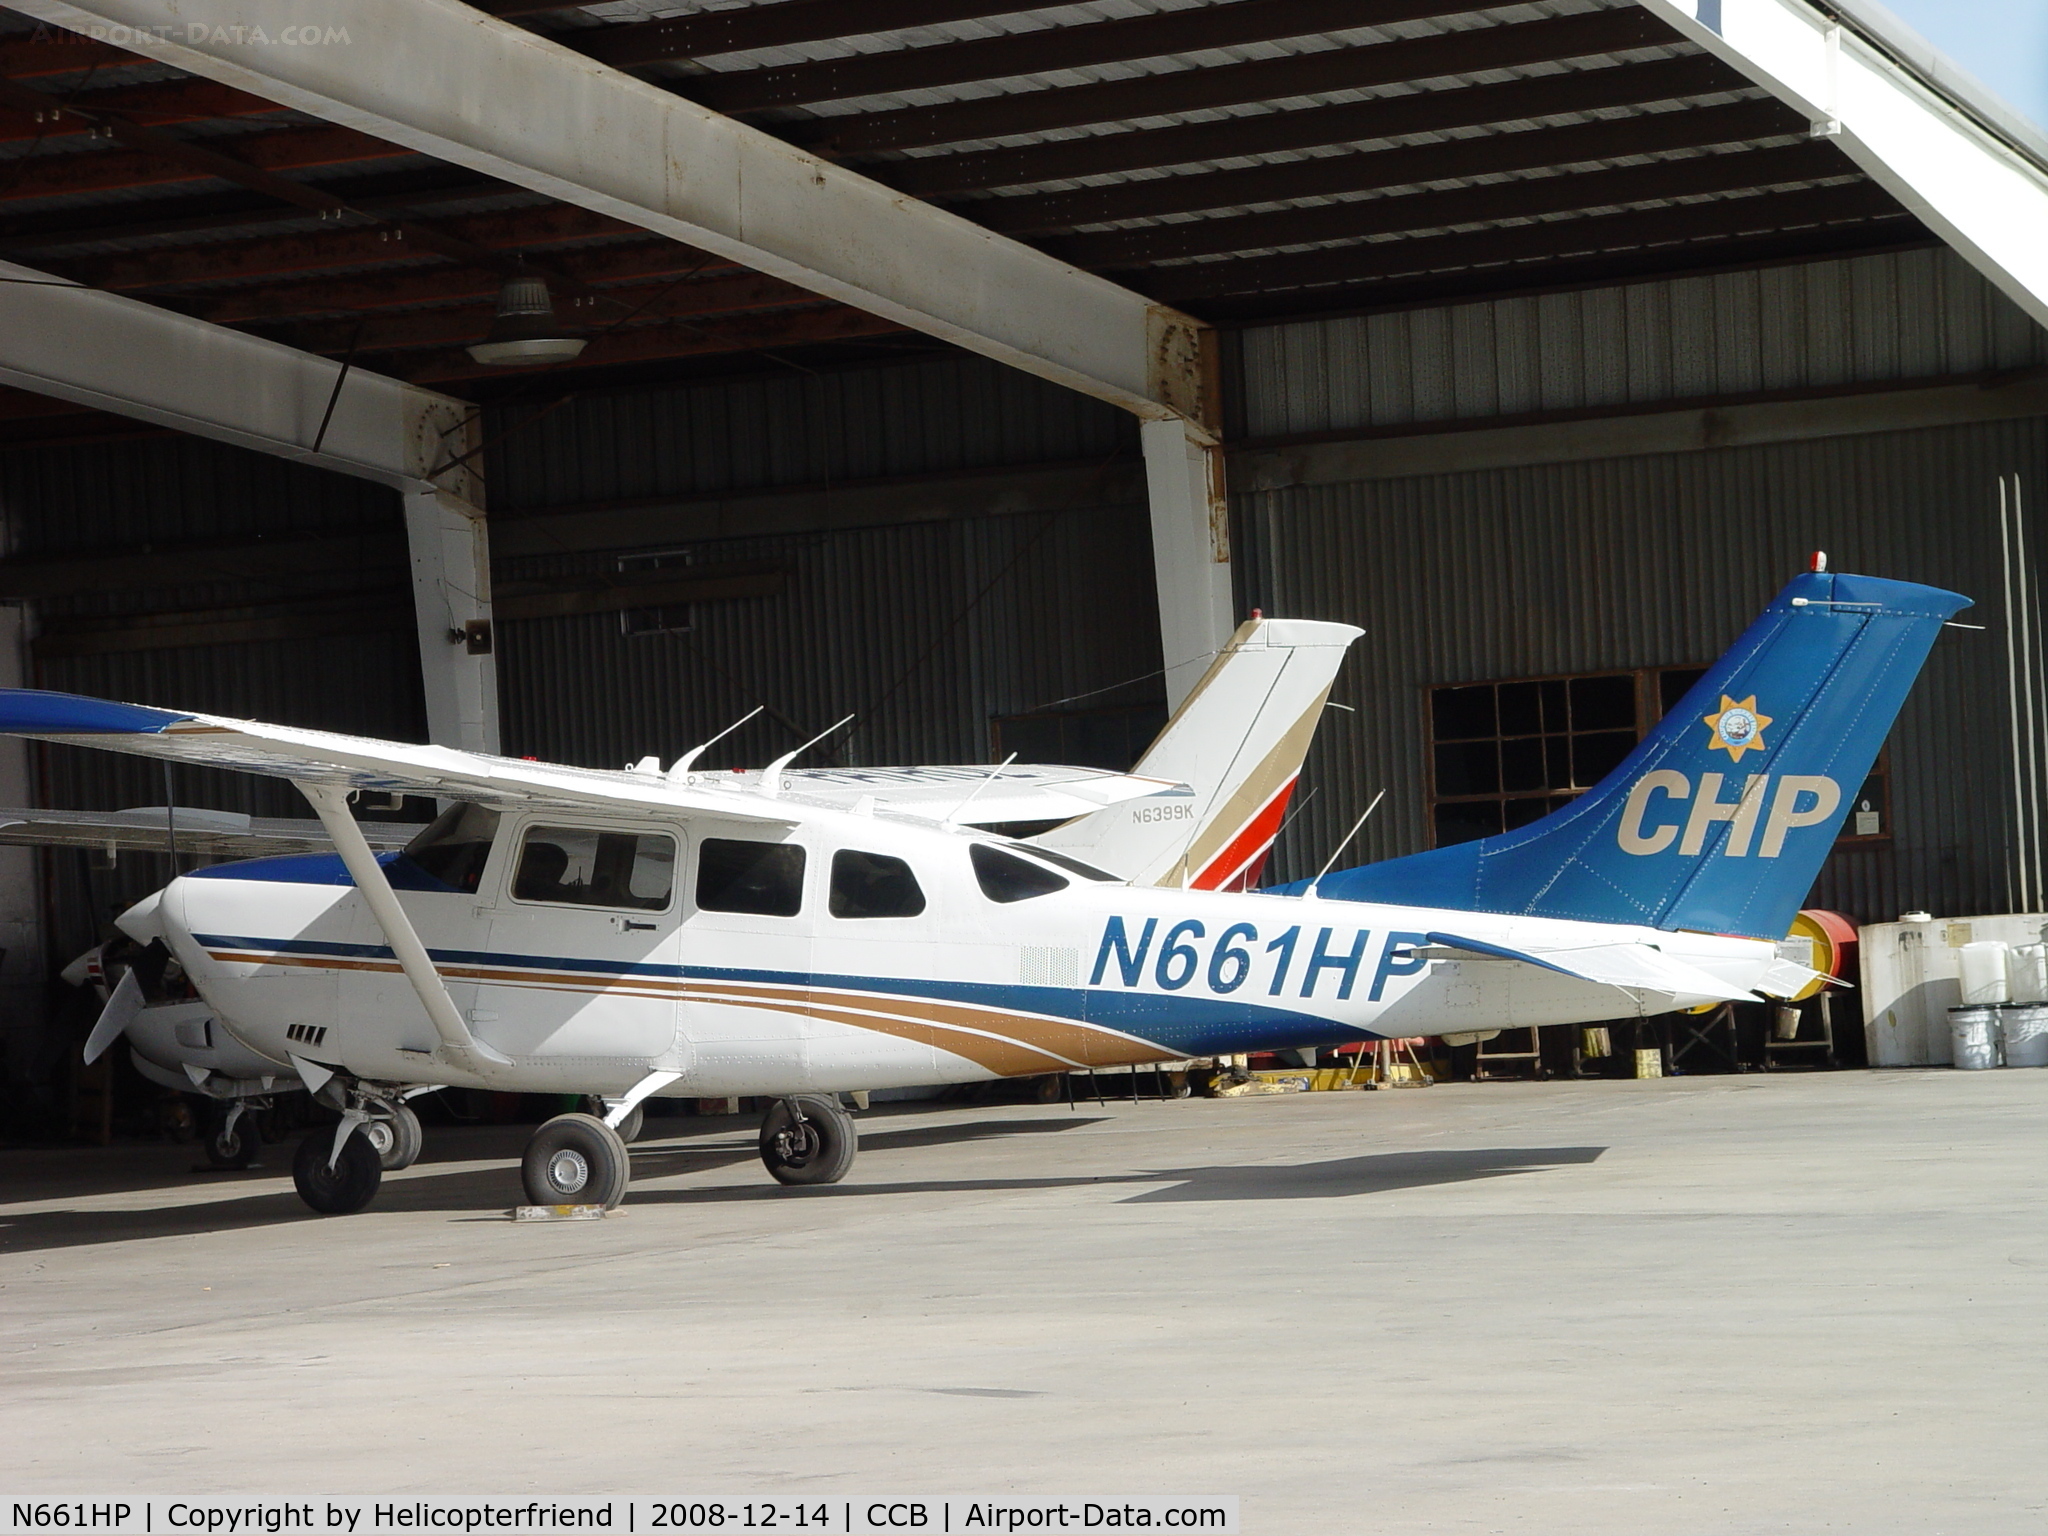 N661HP, 2000 Cessna T206H Turbo Stationair C/N T20608208, Waiting at Cable to be looked at